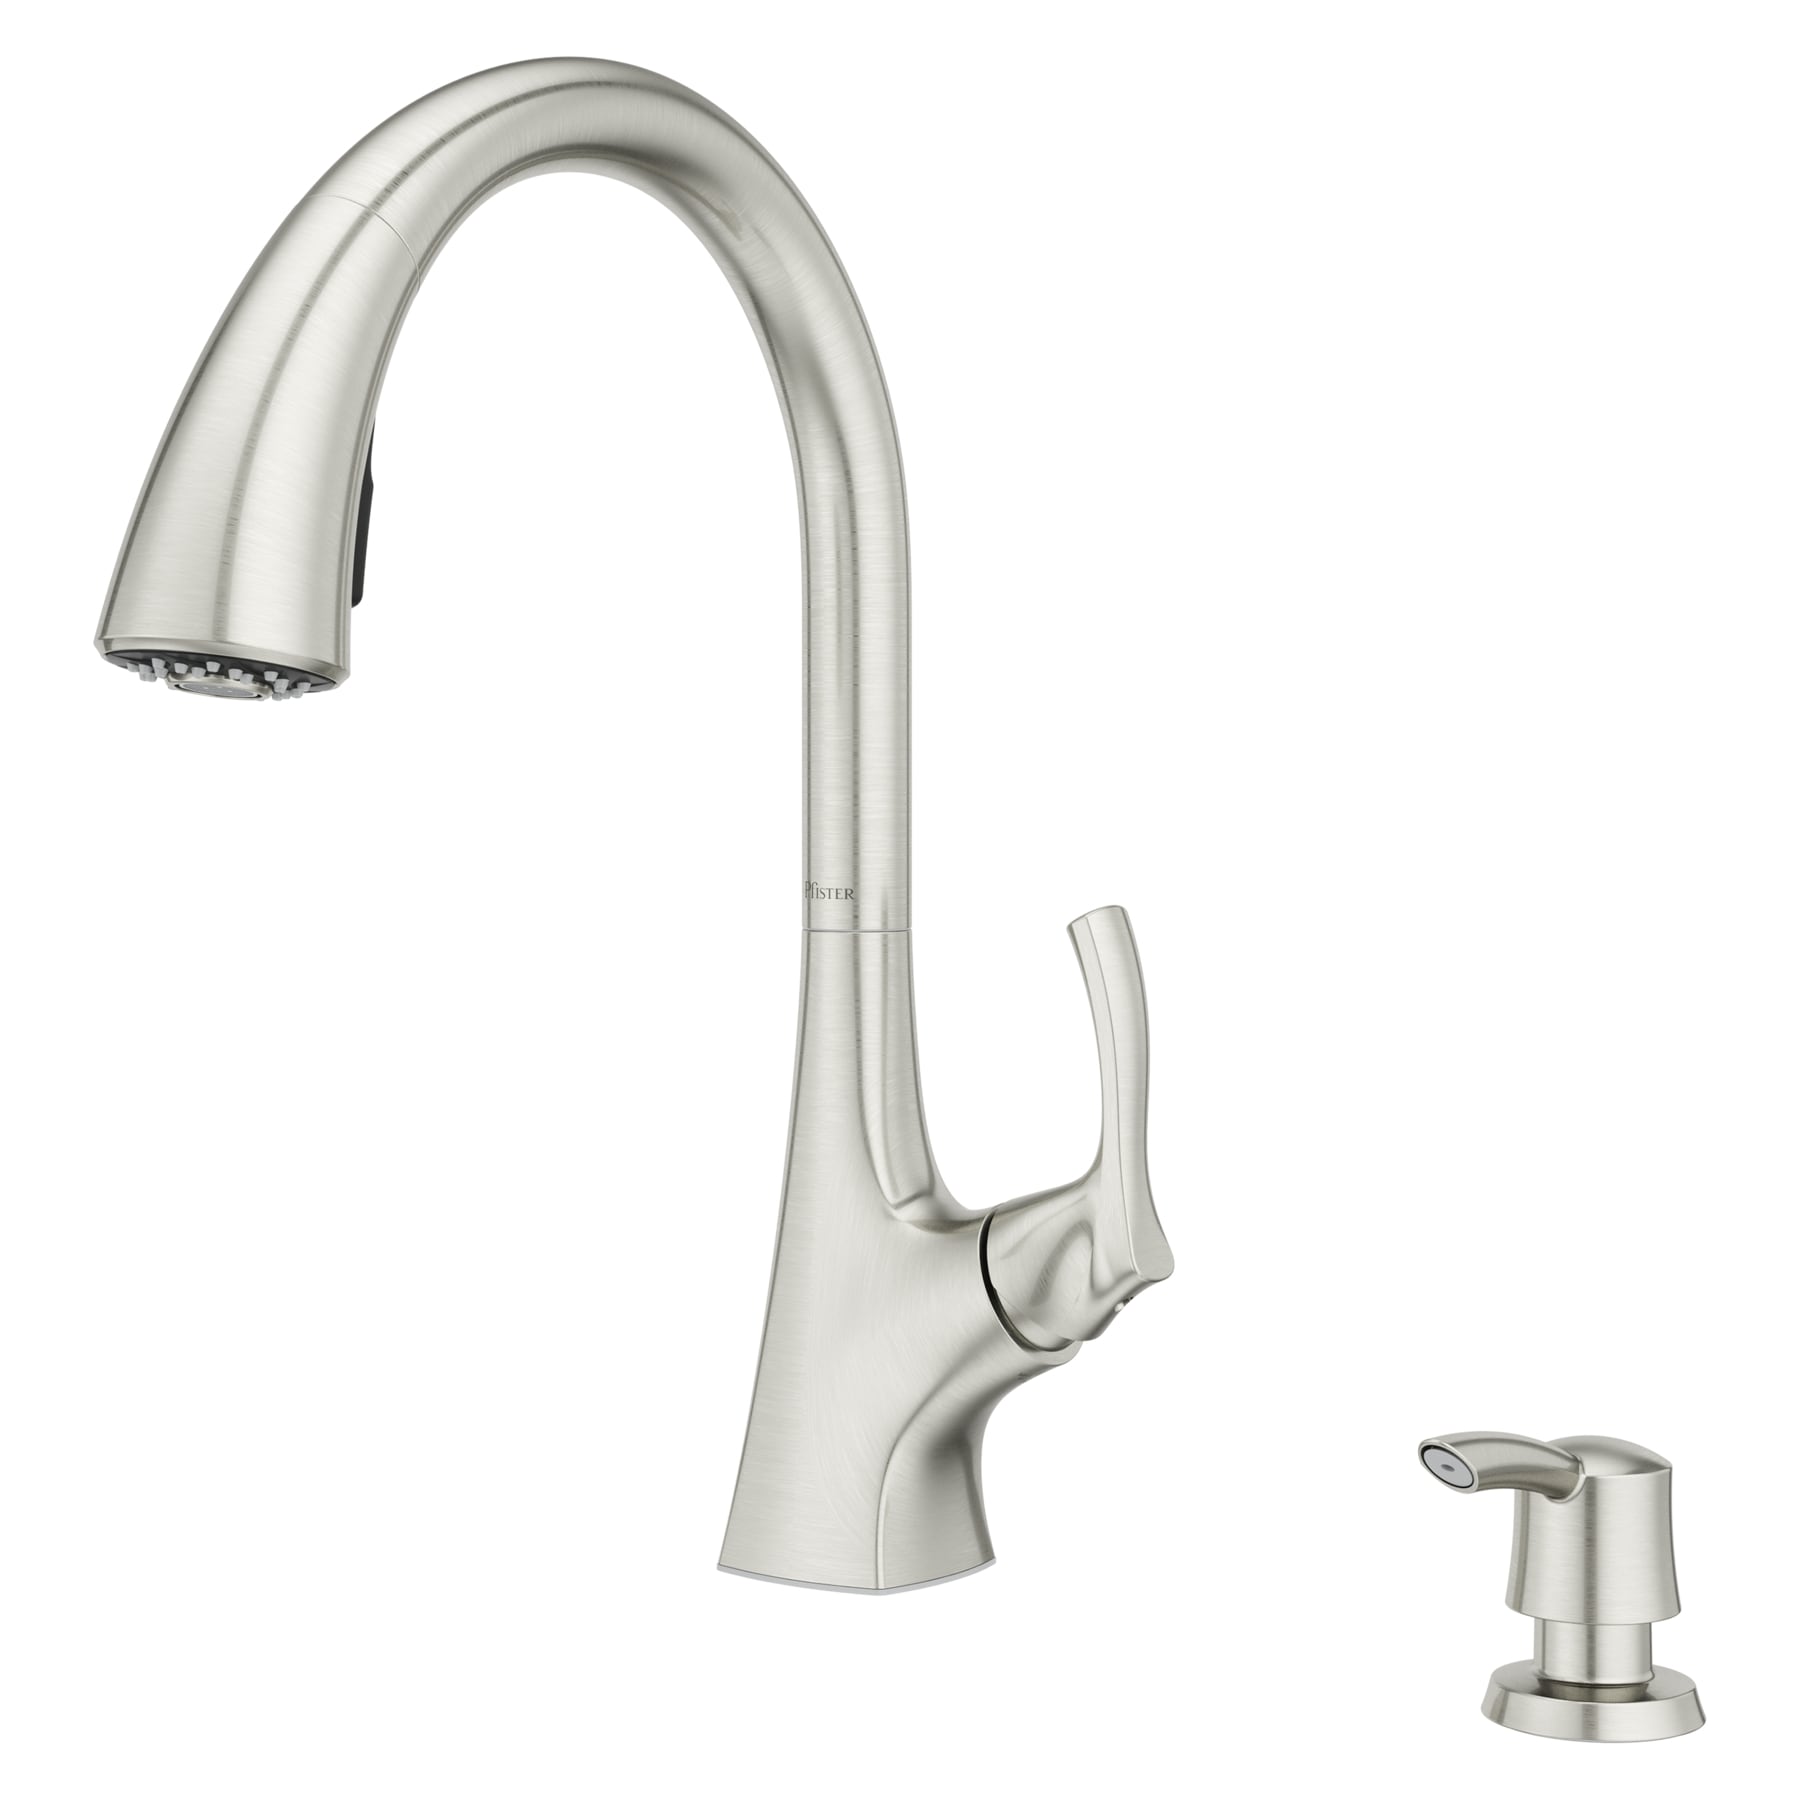 Masey Stainless Steel Single Handle Pull-down Kitchen Faucet with Deck Plate and Soap Dispenser Included | - Pfister F-529-7MCS